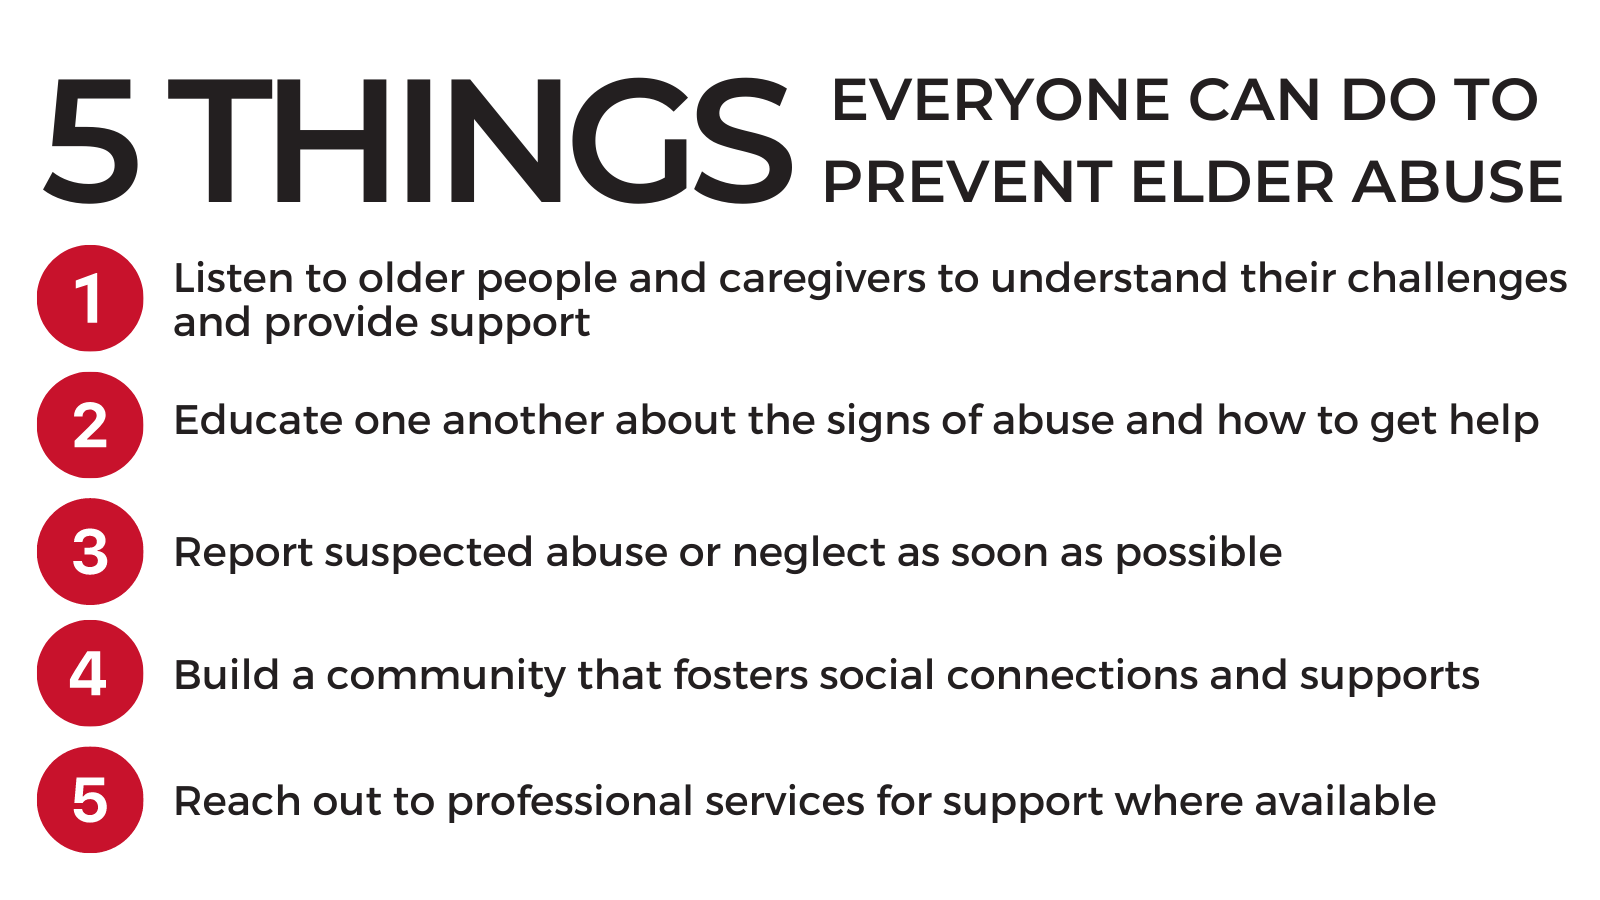 Image to share 5 things everyone can do to prevent elder abuse